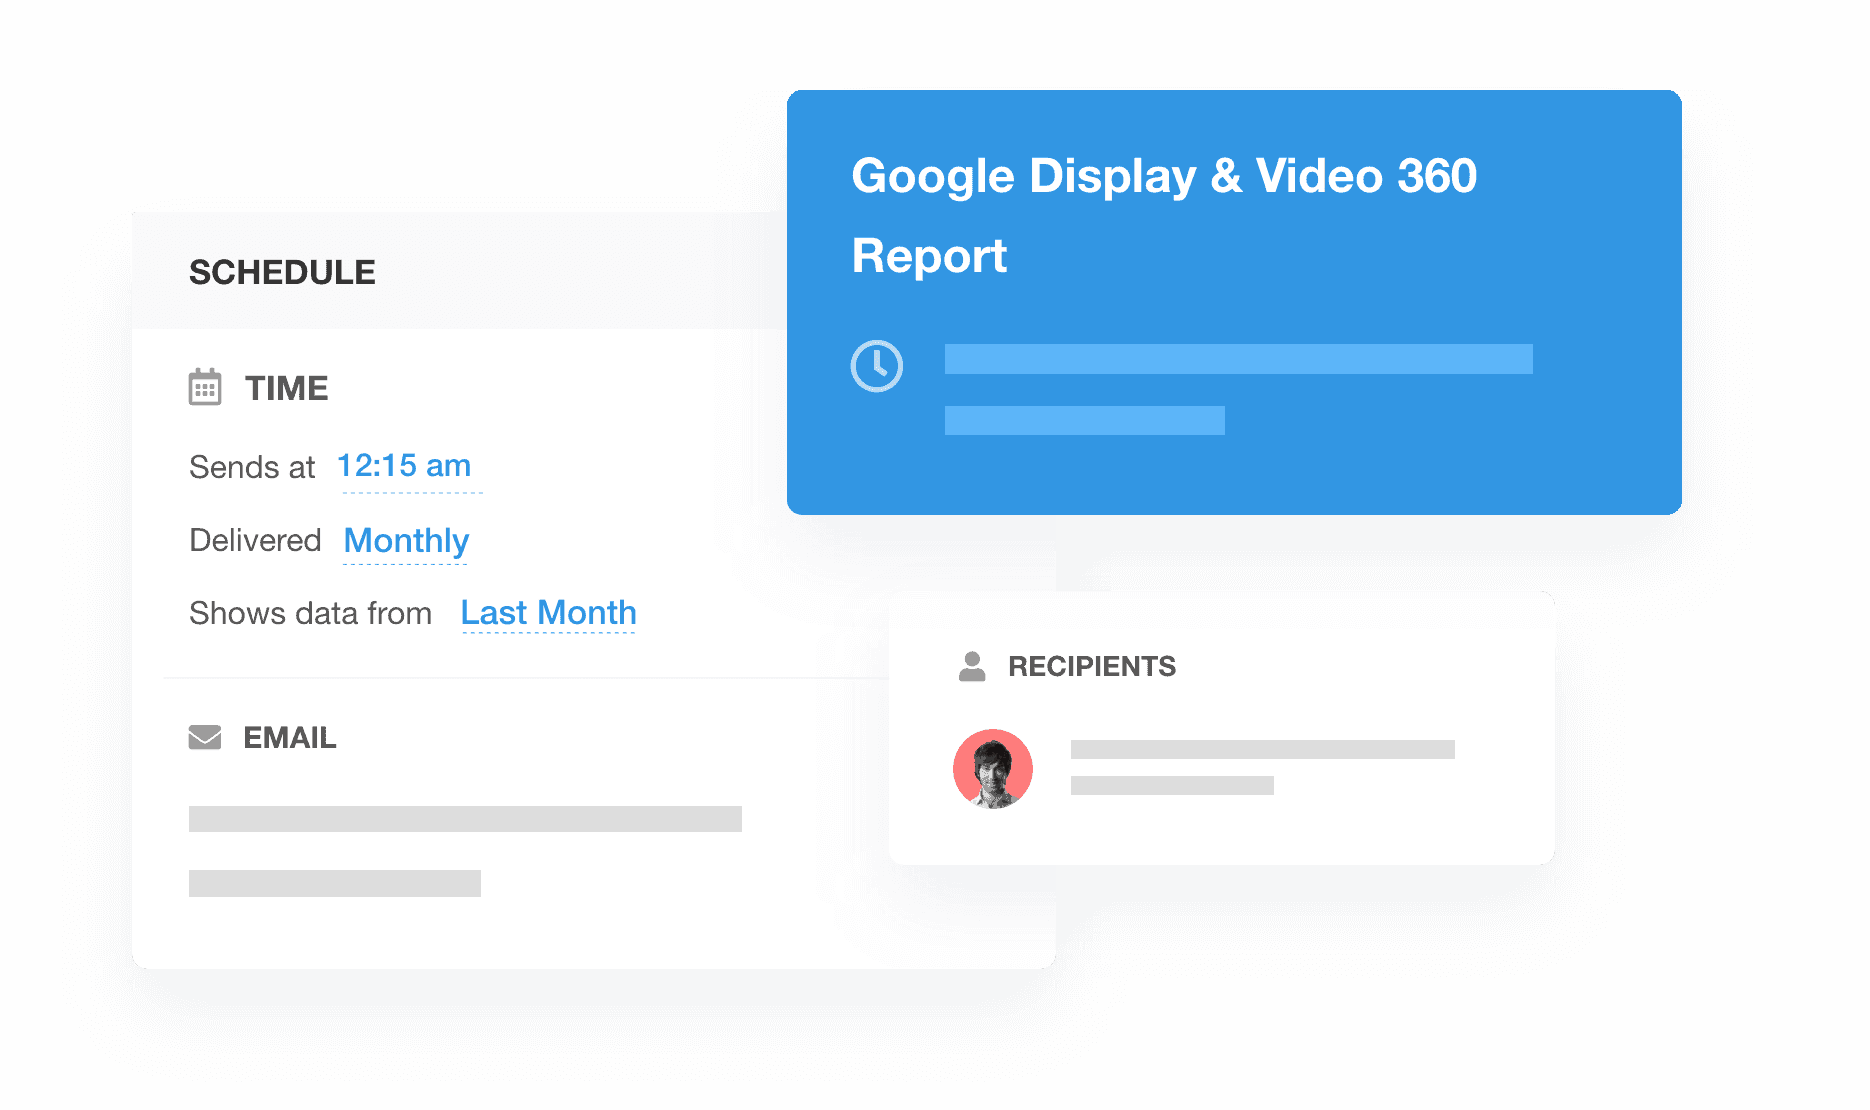 Automate Your Google Display & Video 360 Reporting